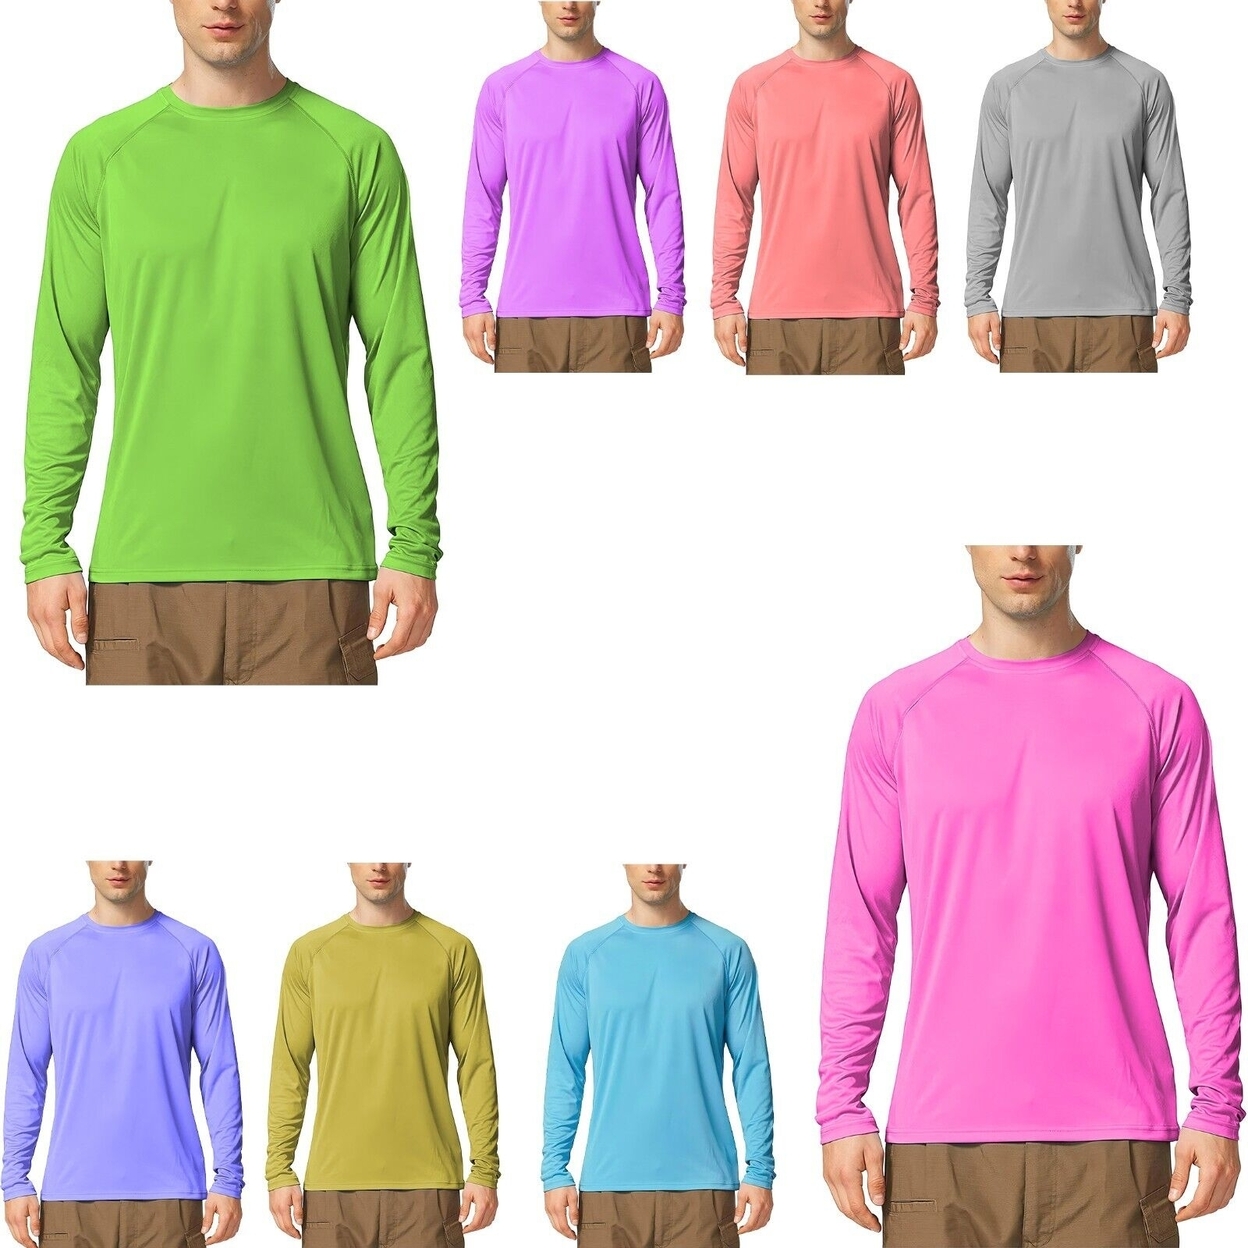 Multi-Pack: Men's Dri-Fit Moisture Wicking Athletic Cool Performance Slim Fit Long Sleeve T-Shirts - 1-pack, Large